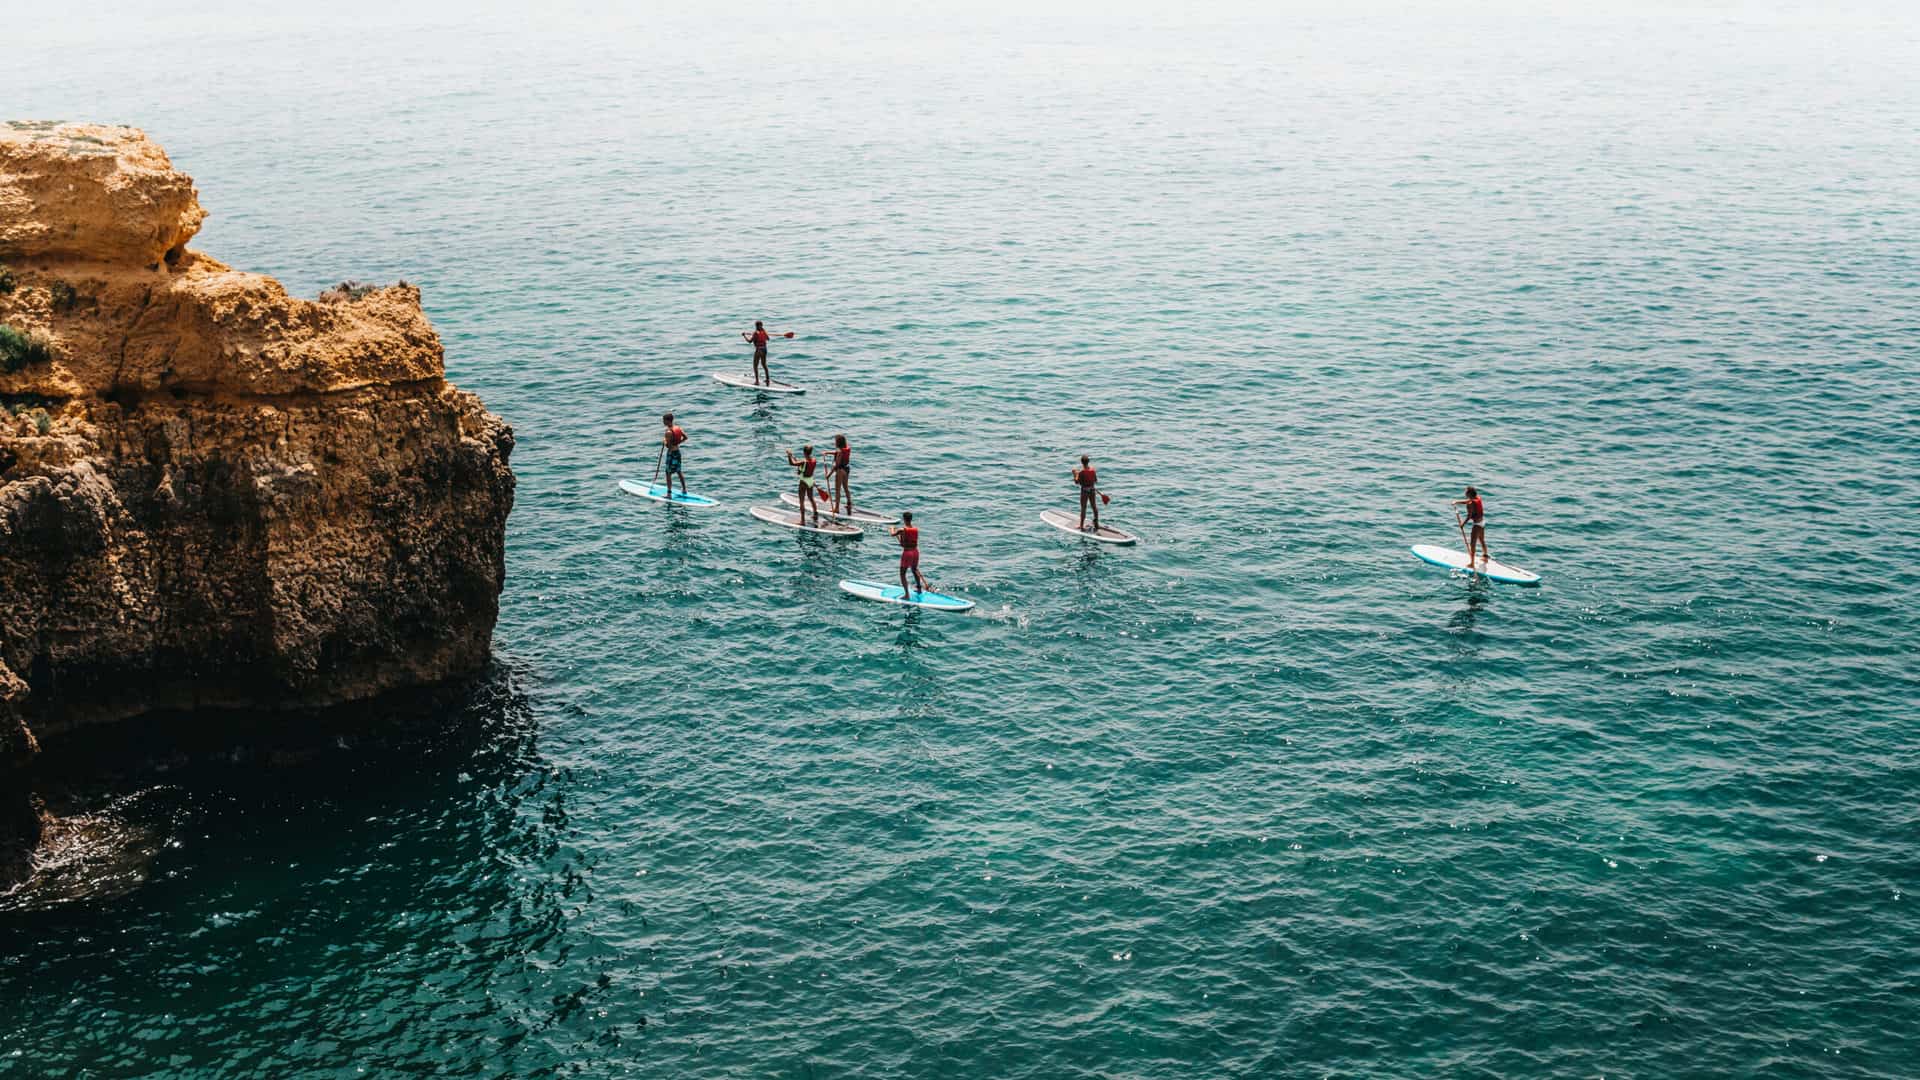 SUP Auckland paddle board tours